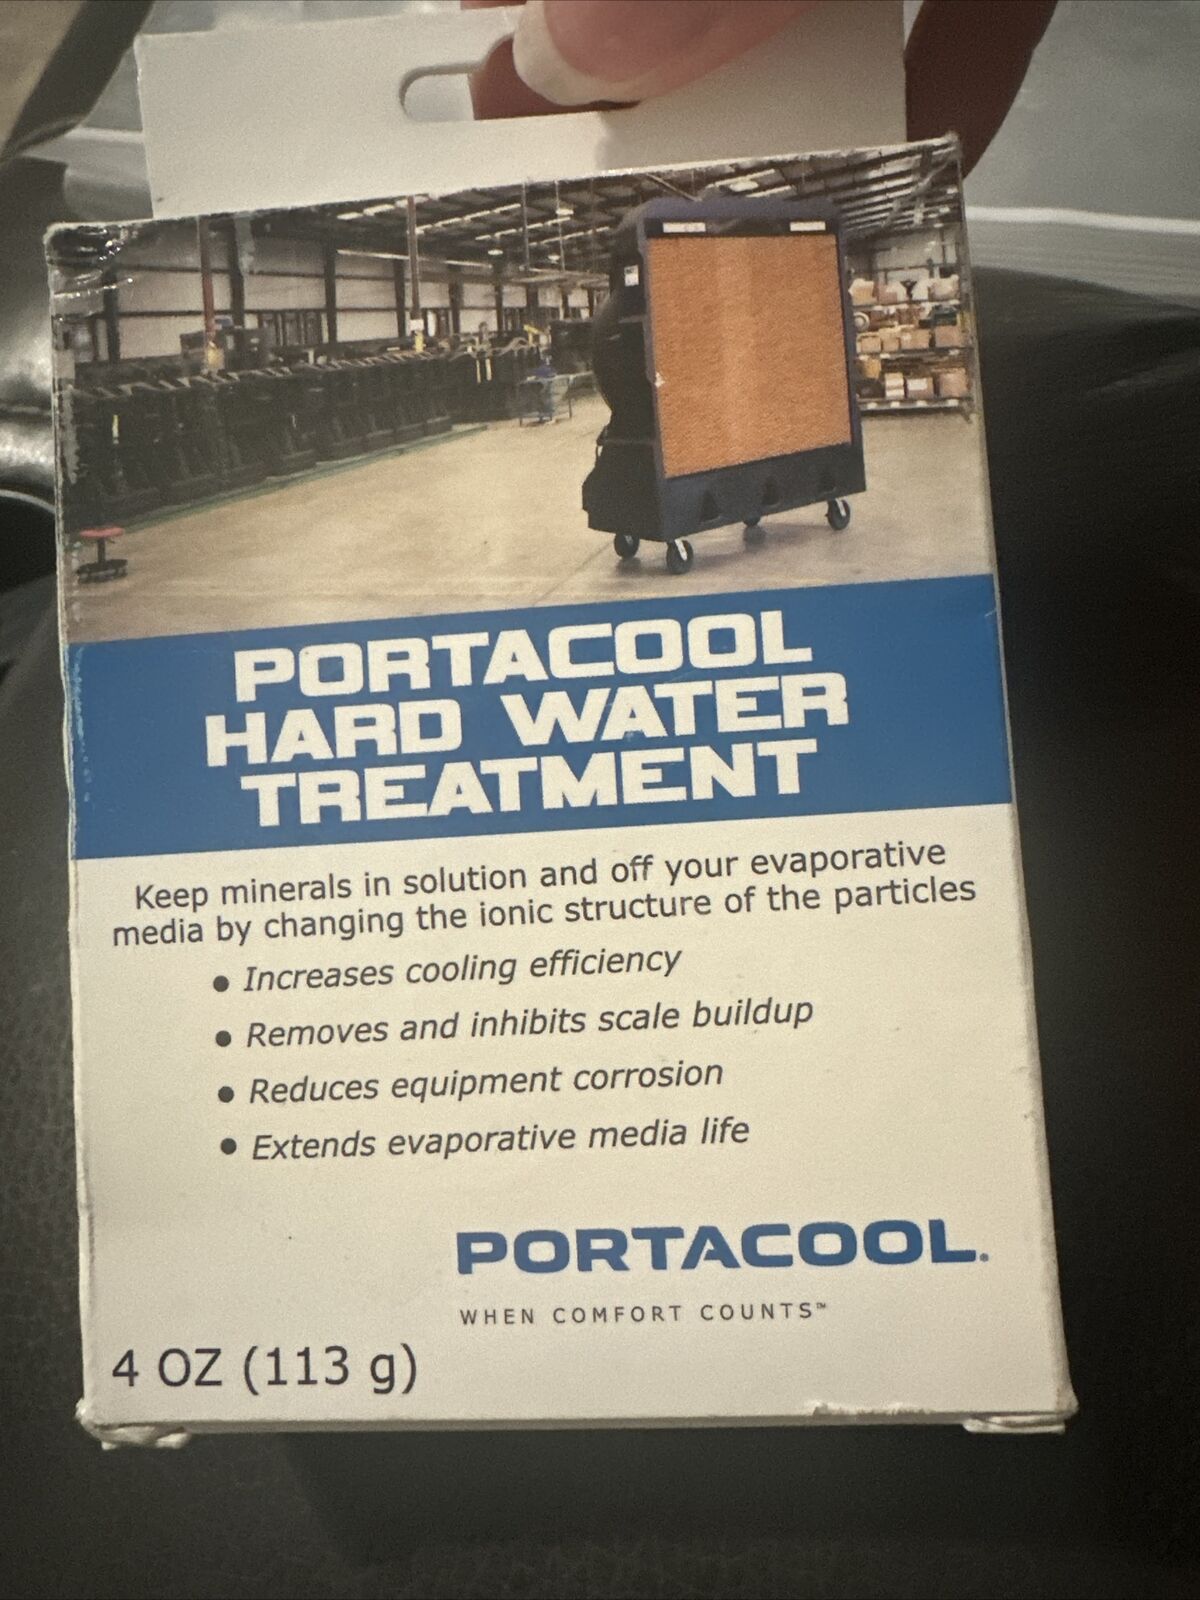 Portacool Parpachwtb00 Hard Water Treatment With 4 Strips (B54)